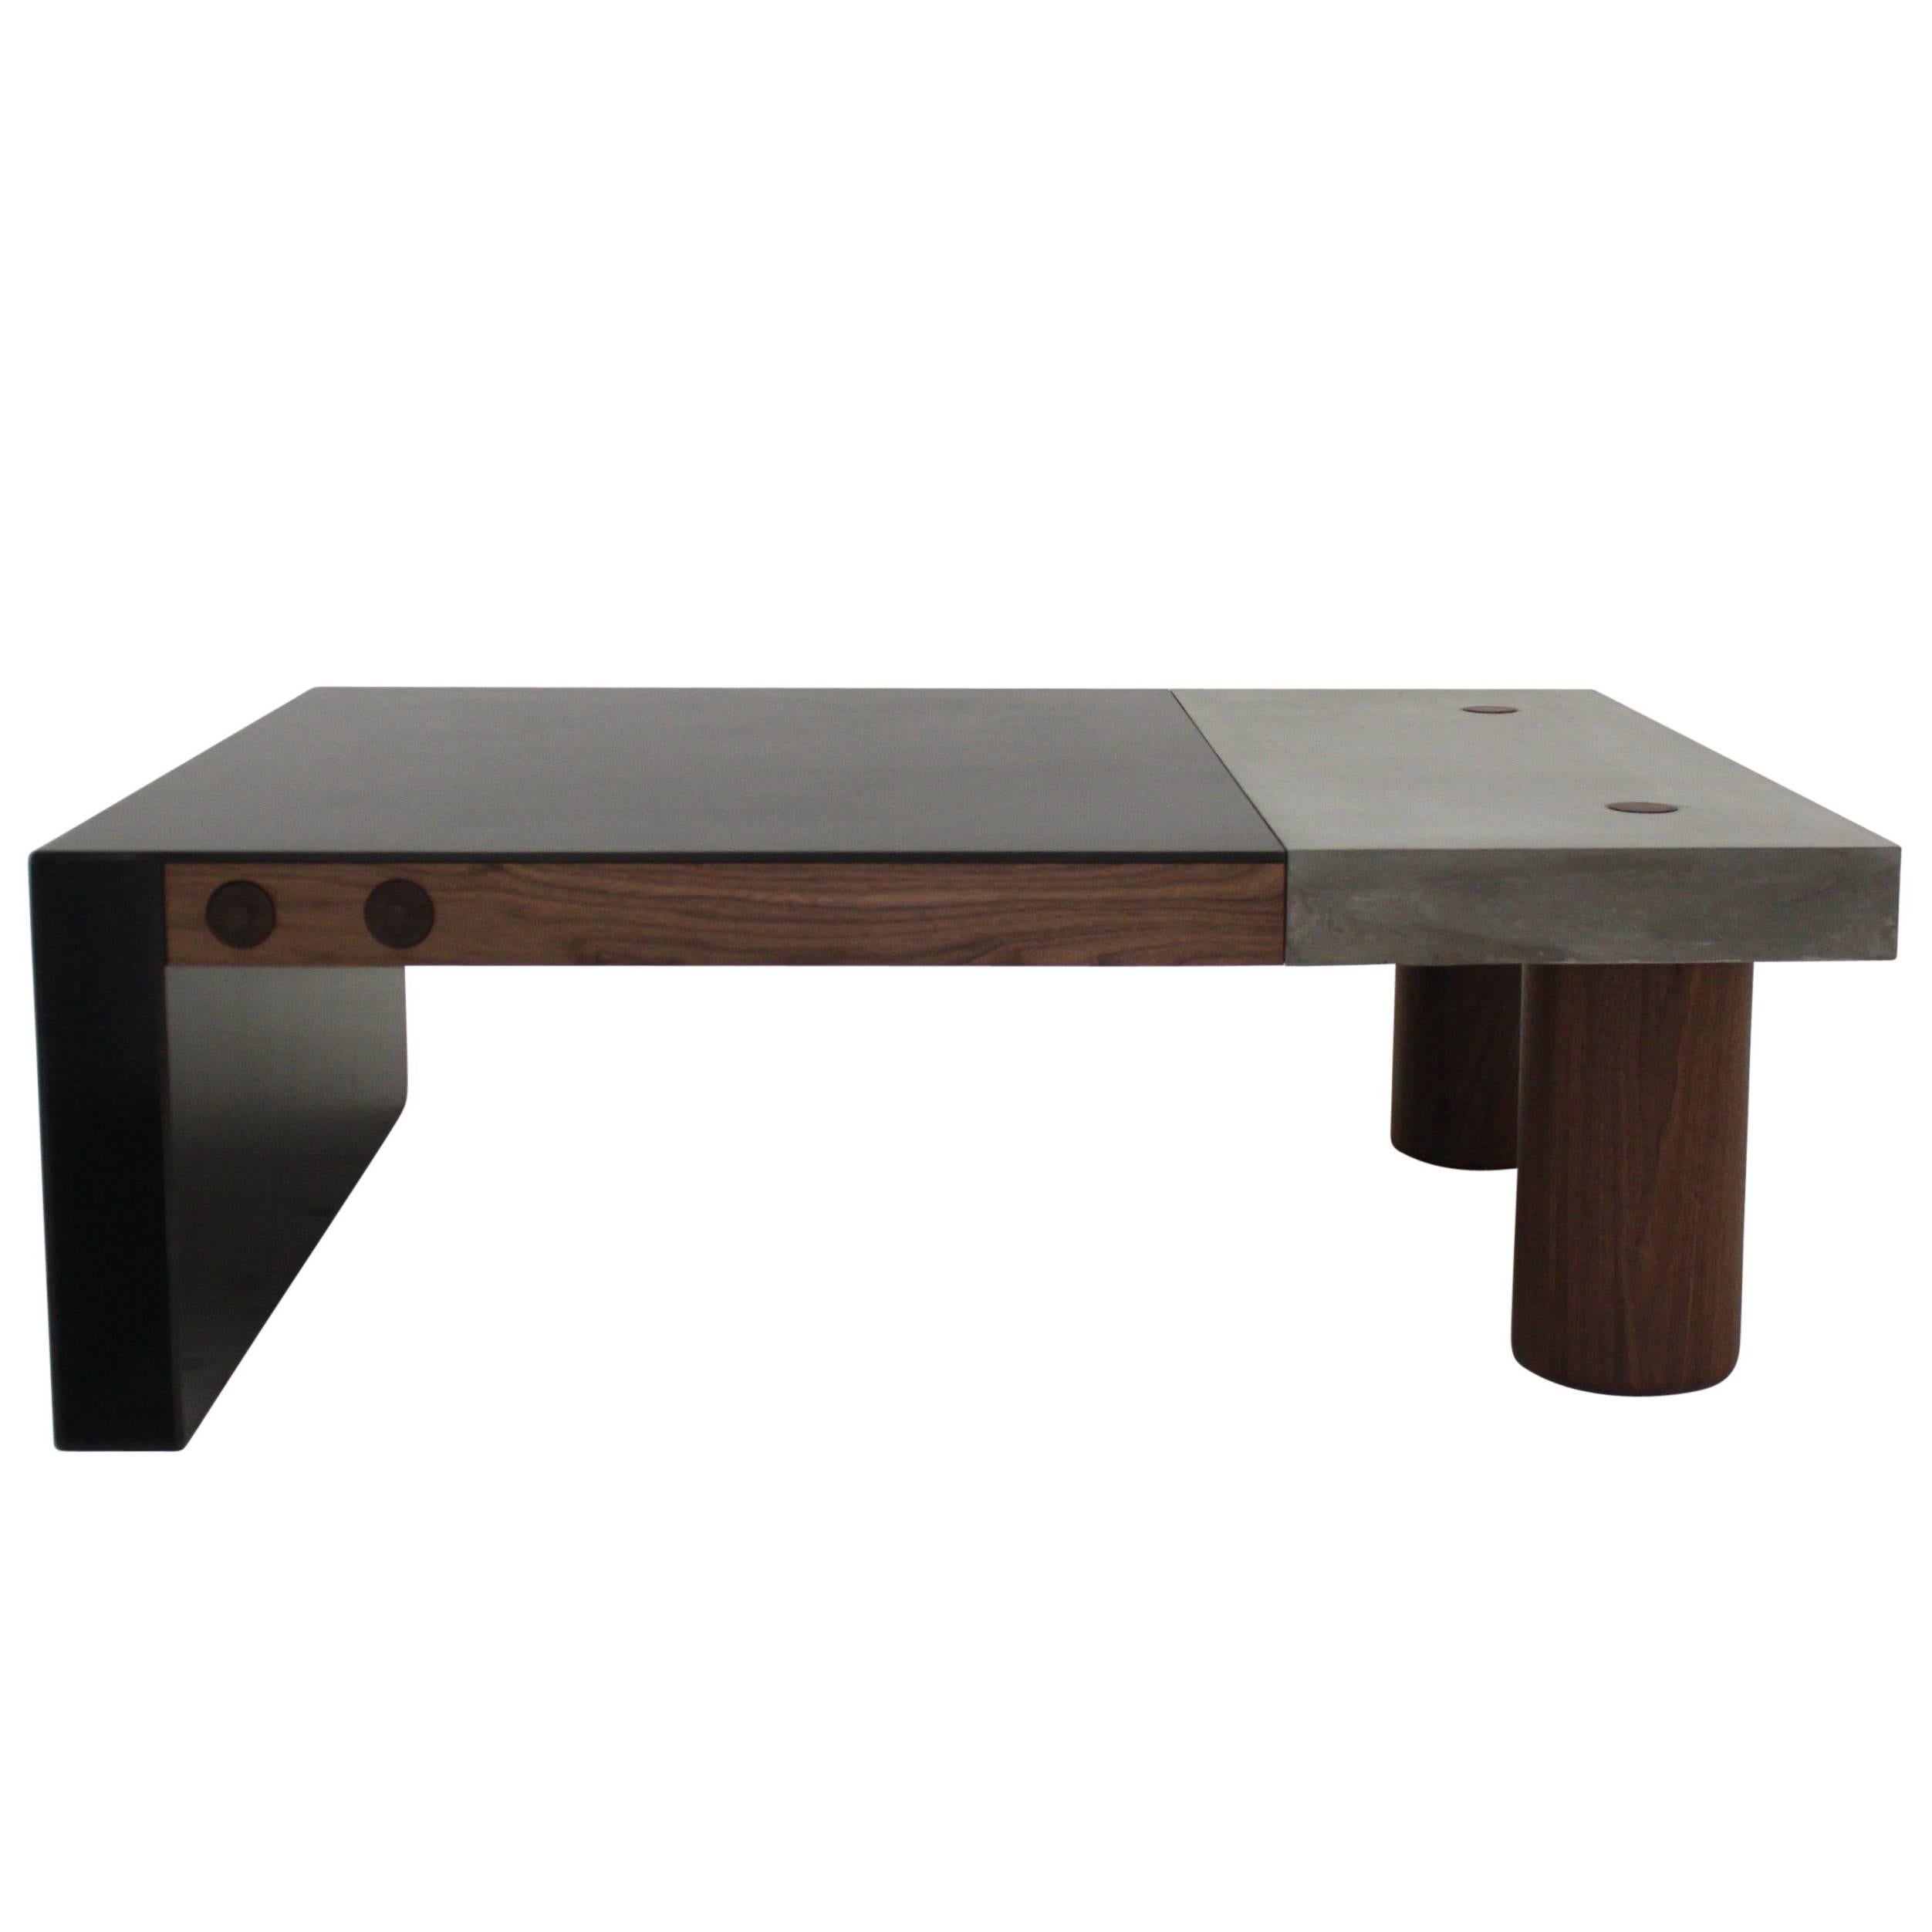 Cast Concrete, Hand-Blackened Steel and Walnut "Paradigm Coffee Table"